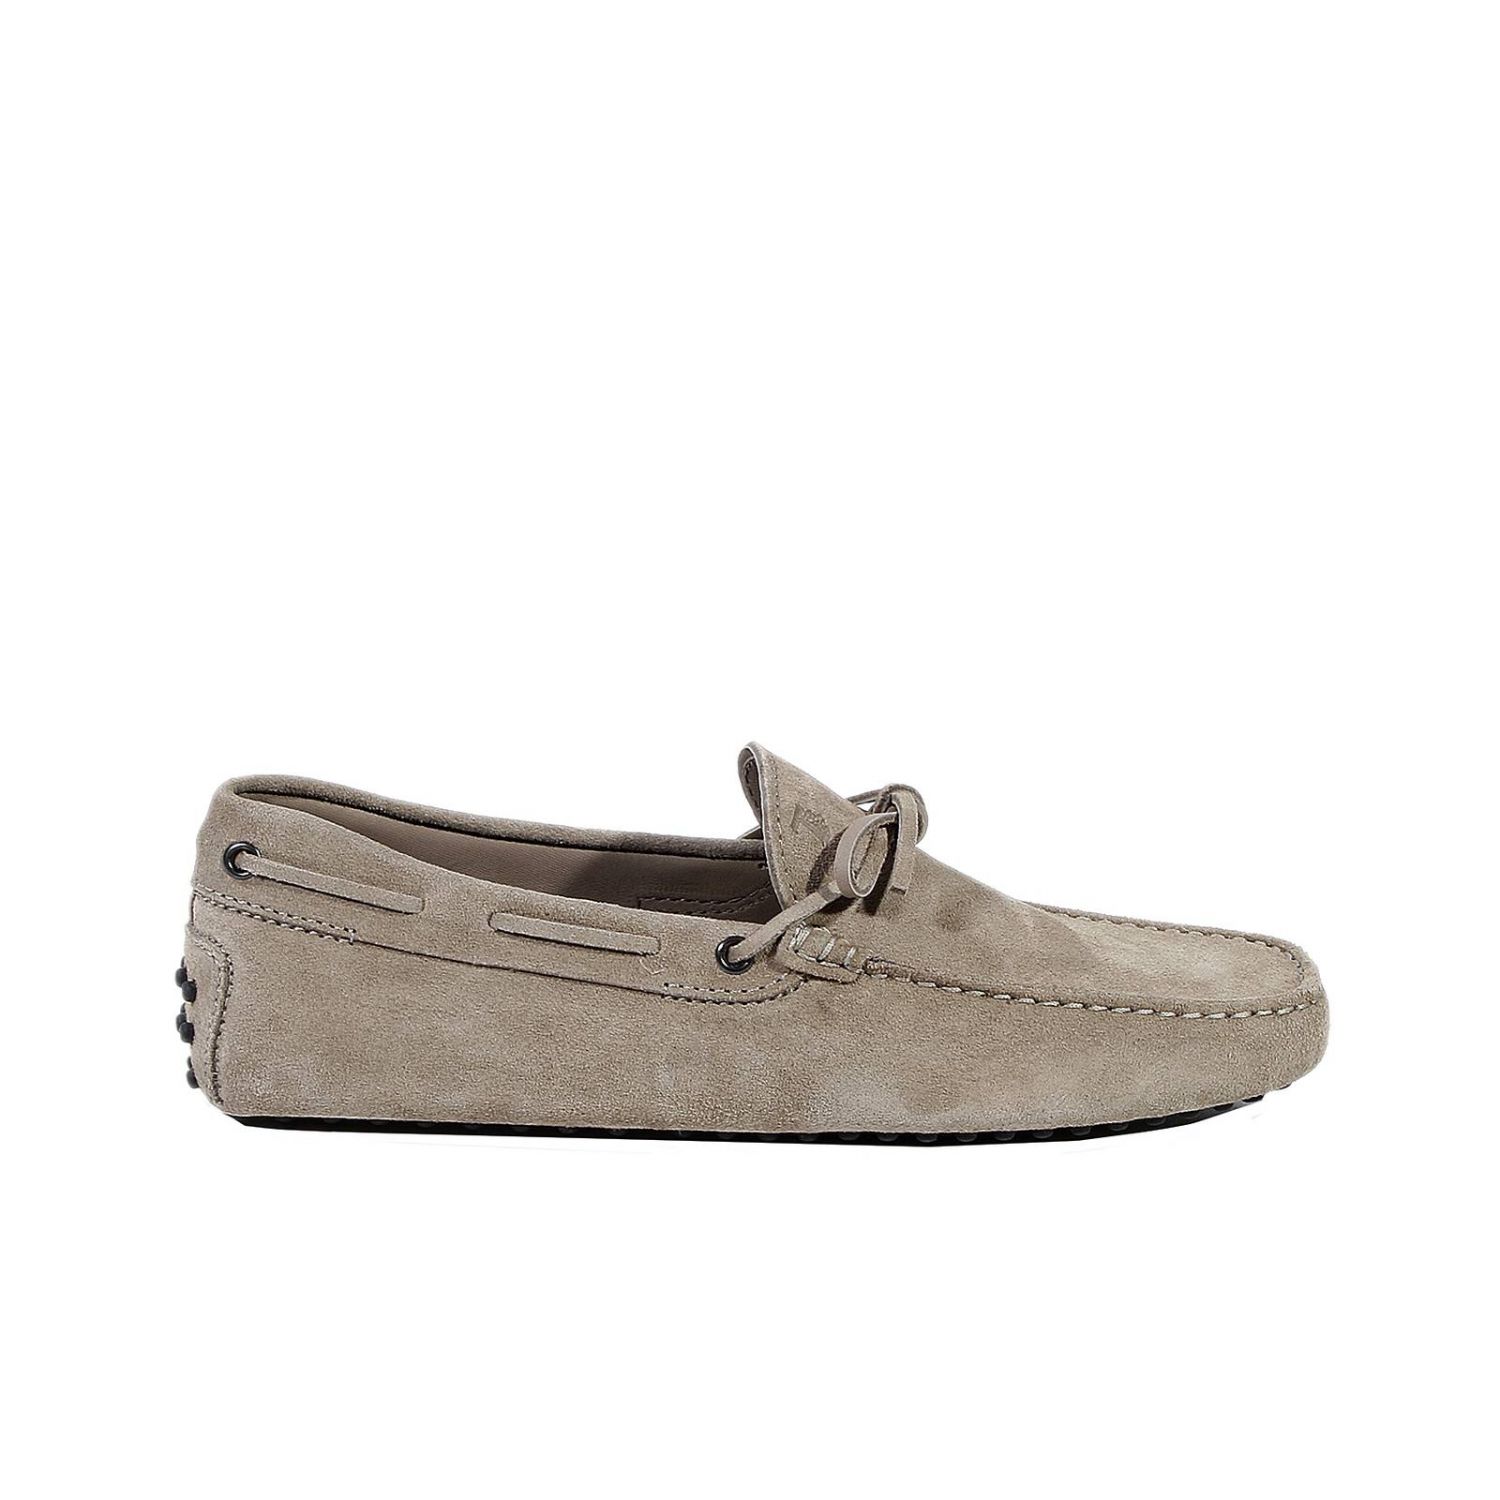 TODS: DRIVE GOMMINI SUEDE STRINGS | Loafers Tods Men Beige | Loafers ...